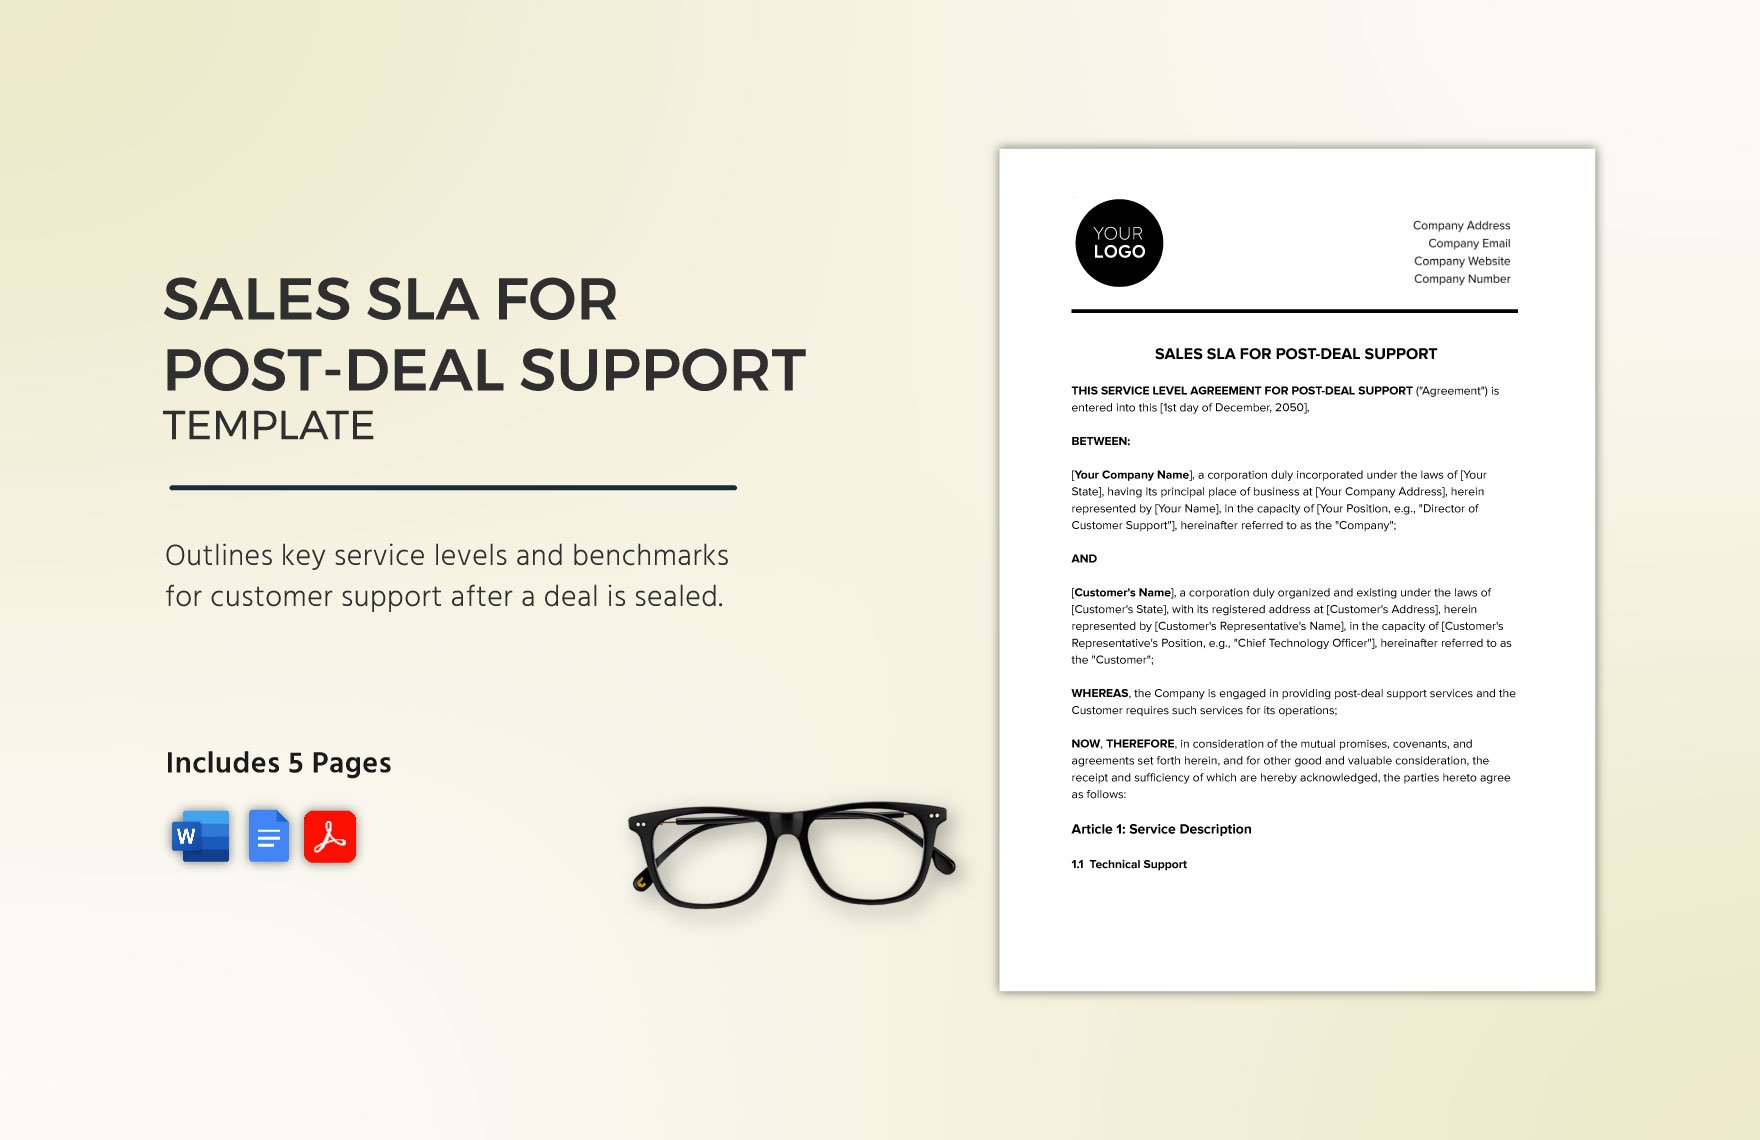 Sales SLA for Post-Deal Support Template